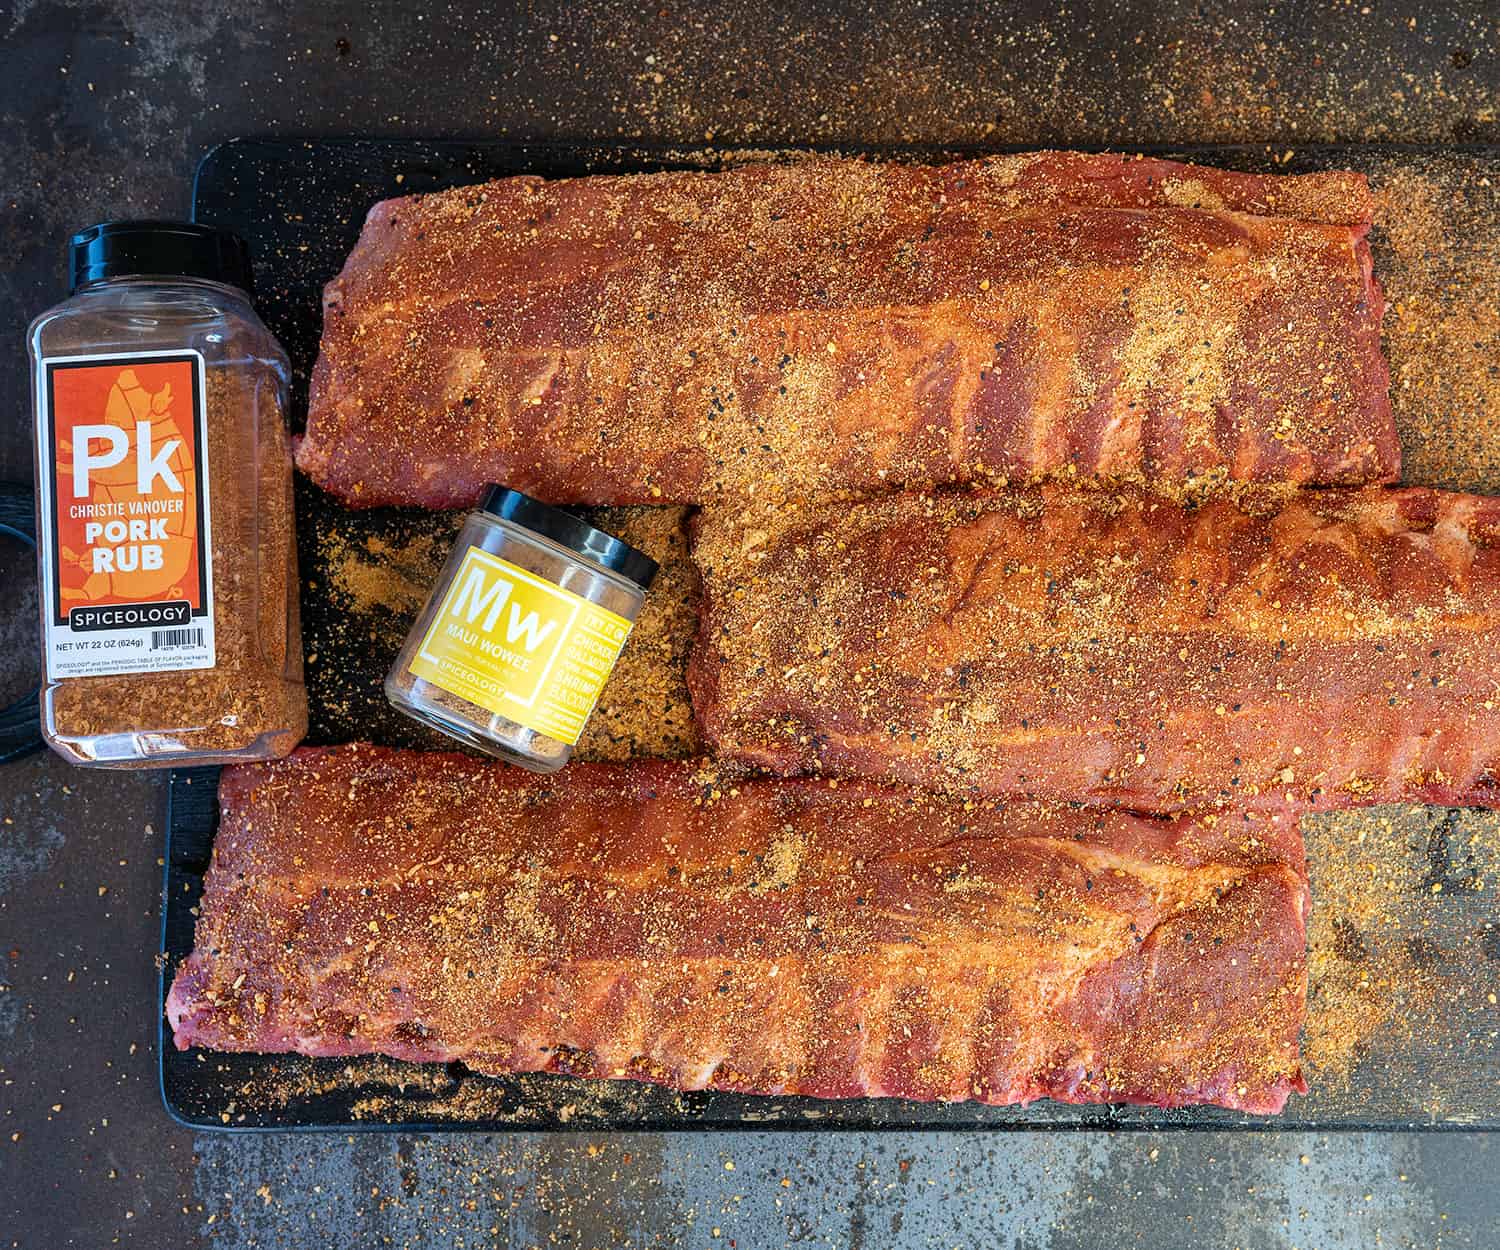 3 racks of pork ribs rubbed with spice